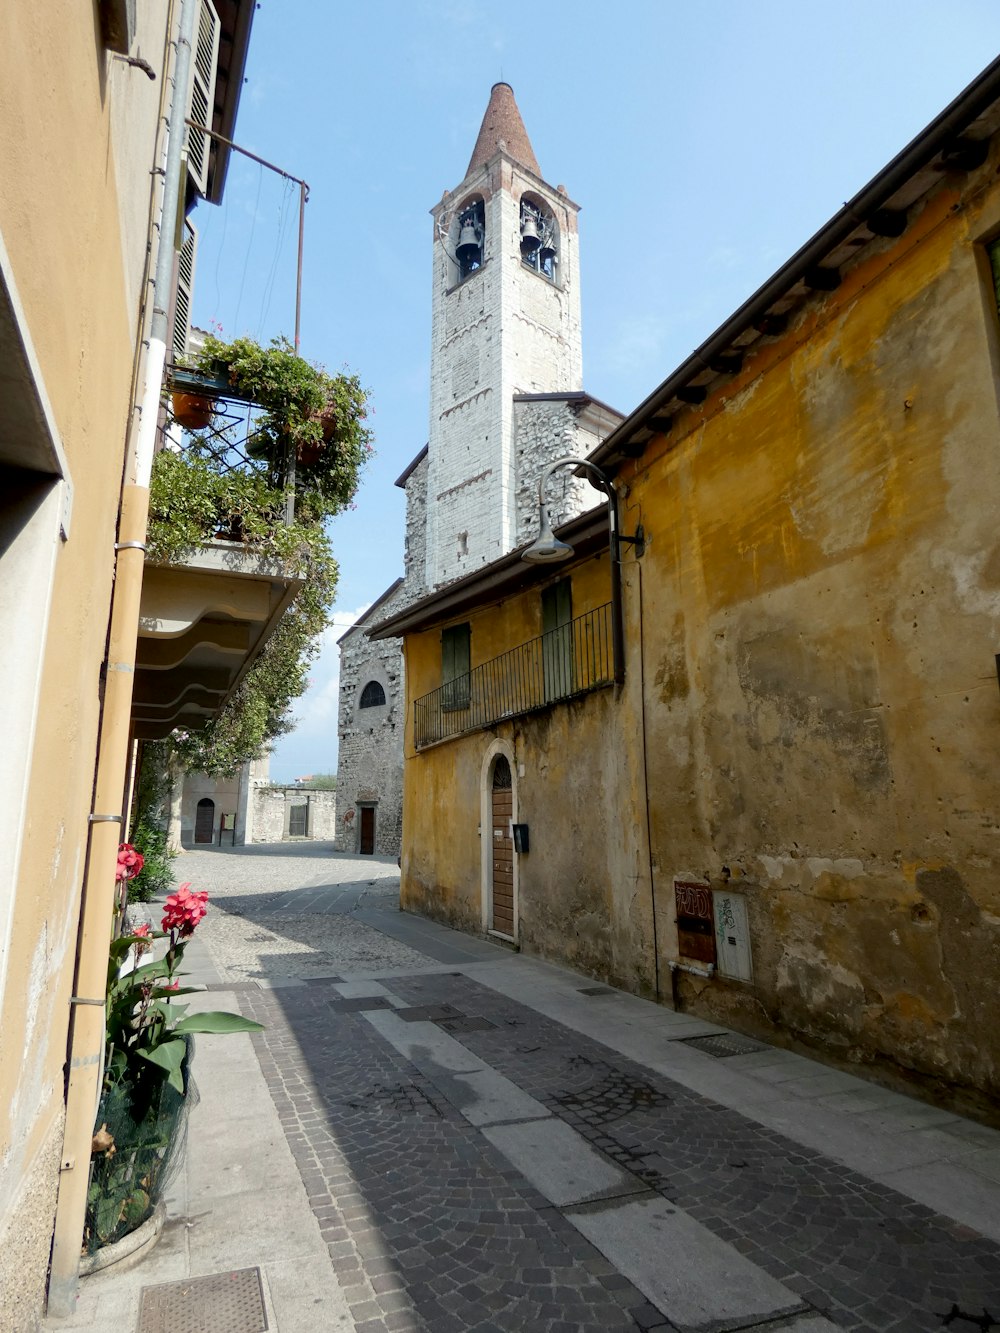 a tall clock tower towering over a city street